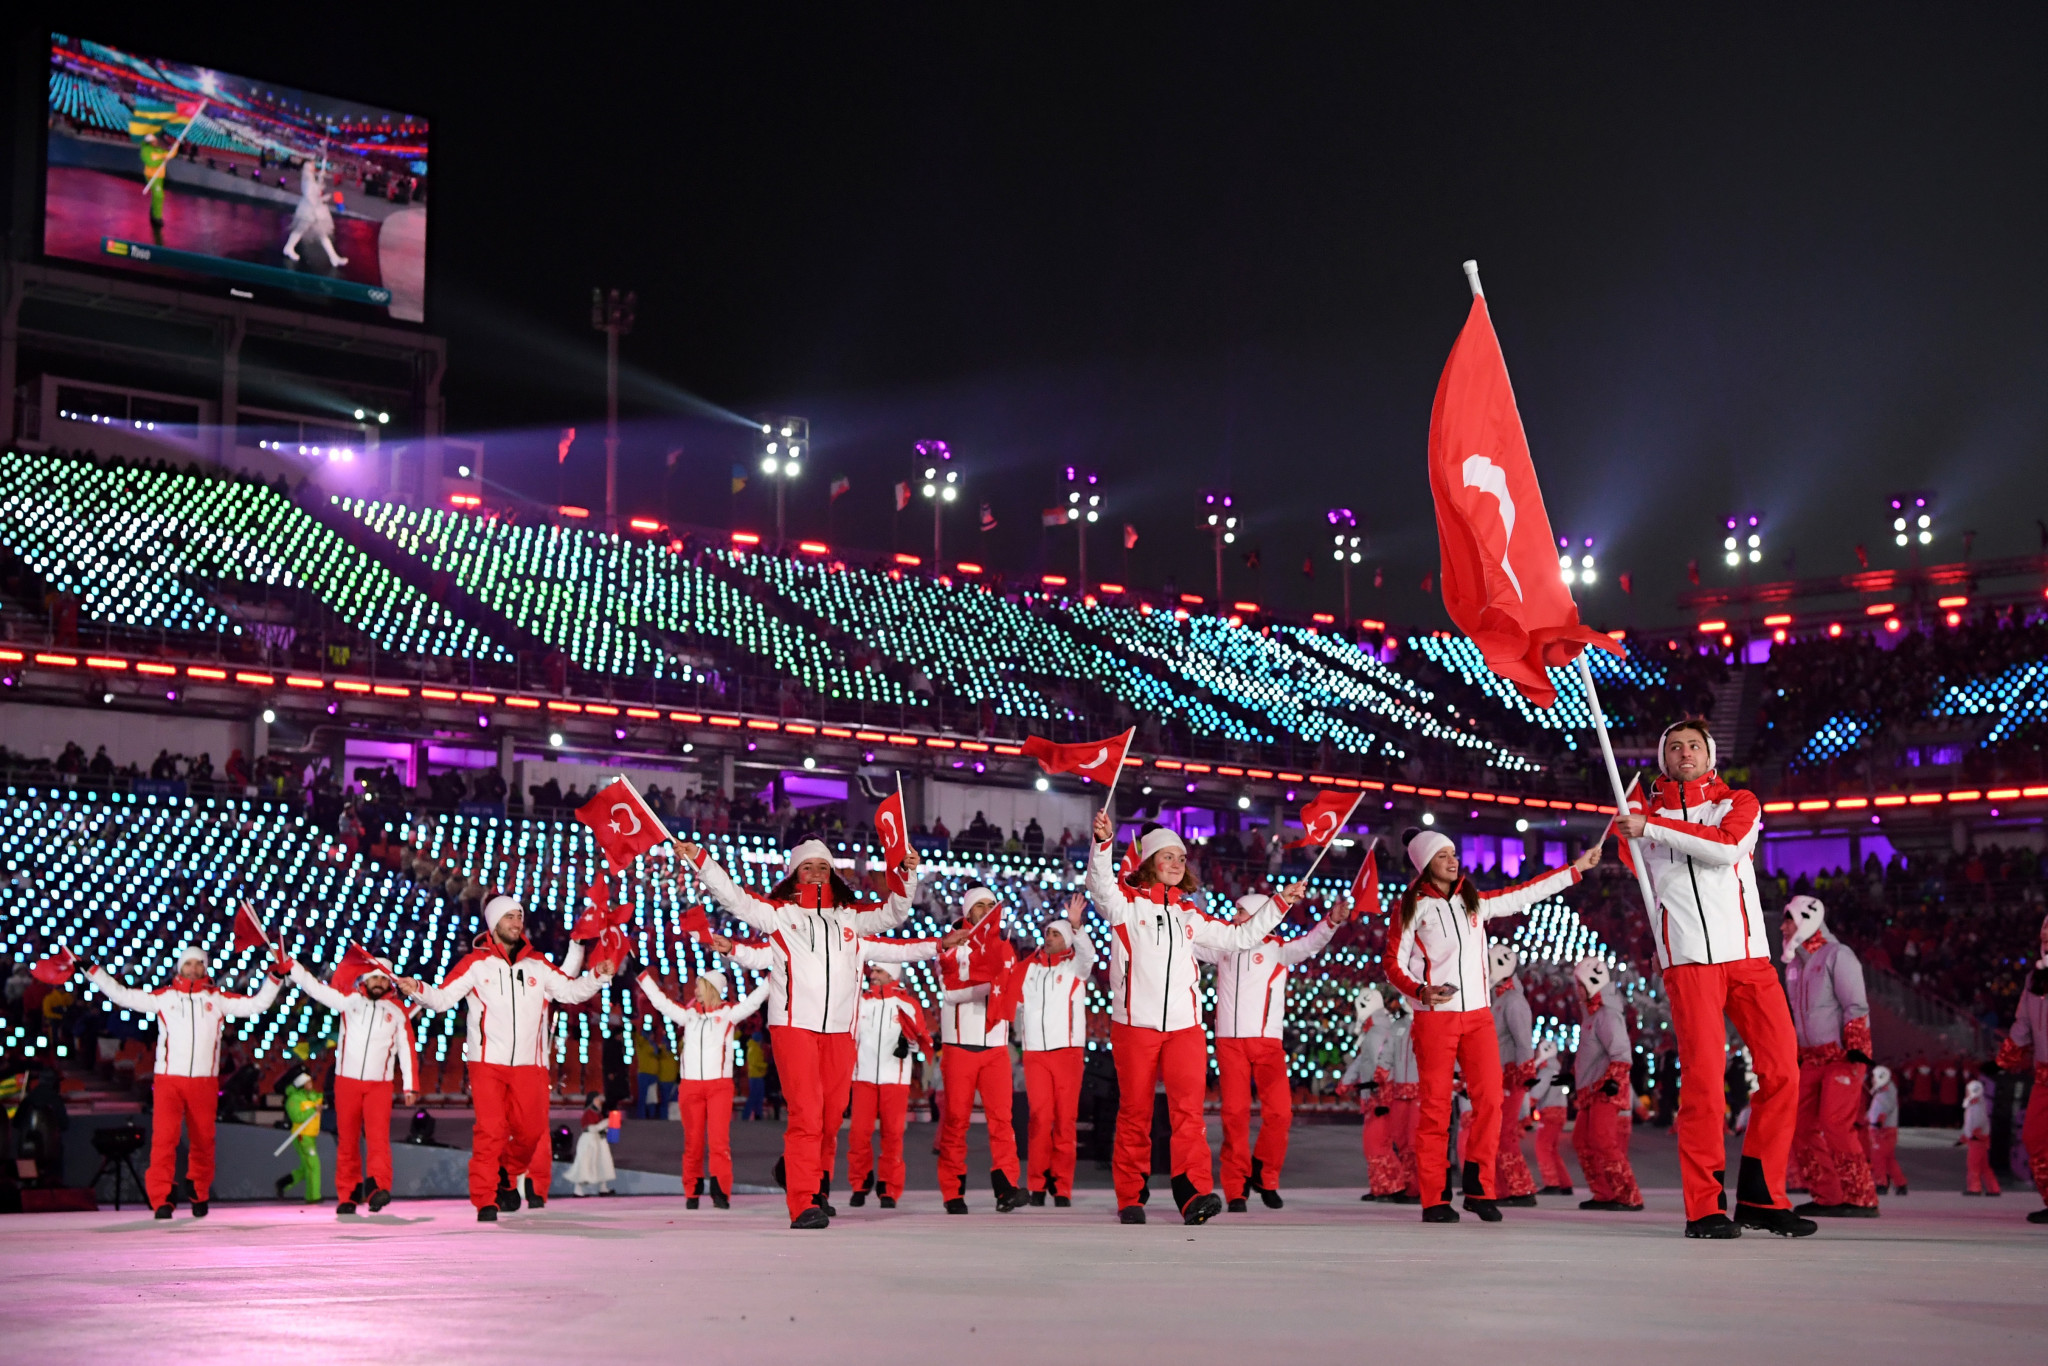 Turkey has yet to win a medal at the Winter Olympics ©Getty Images